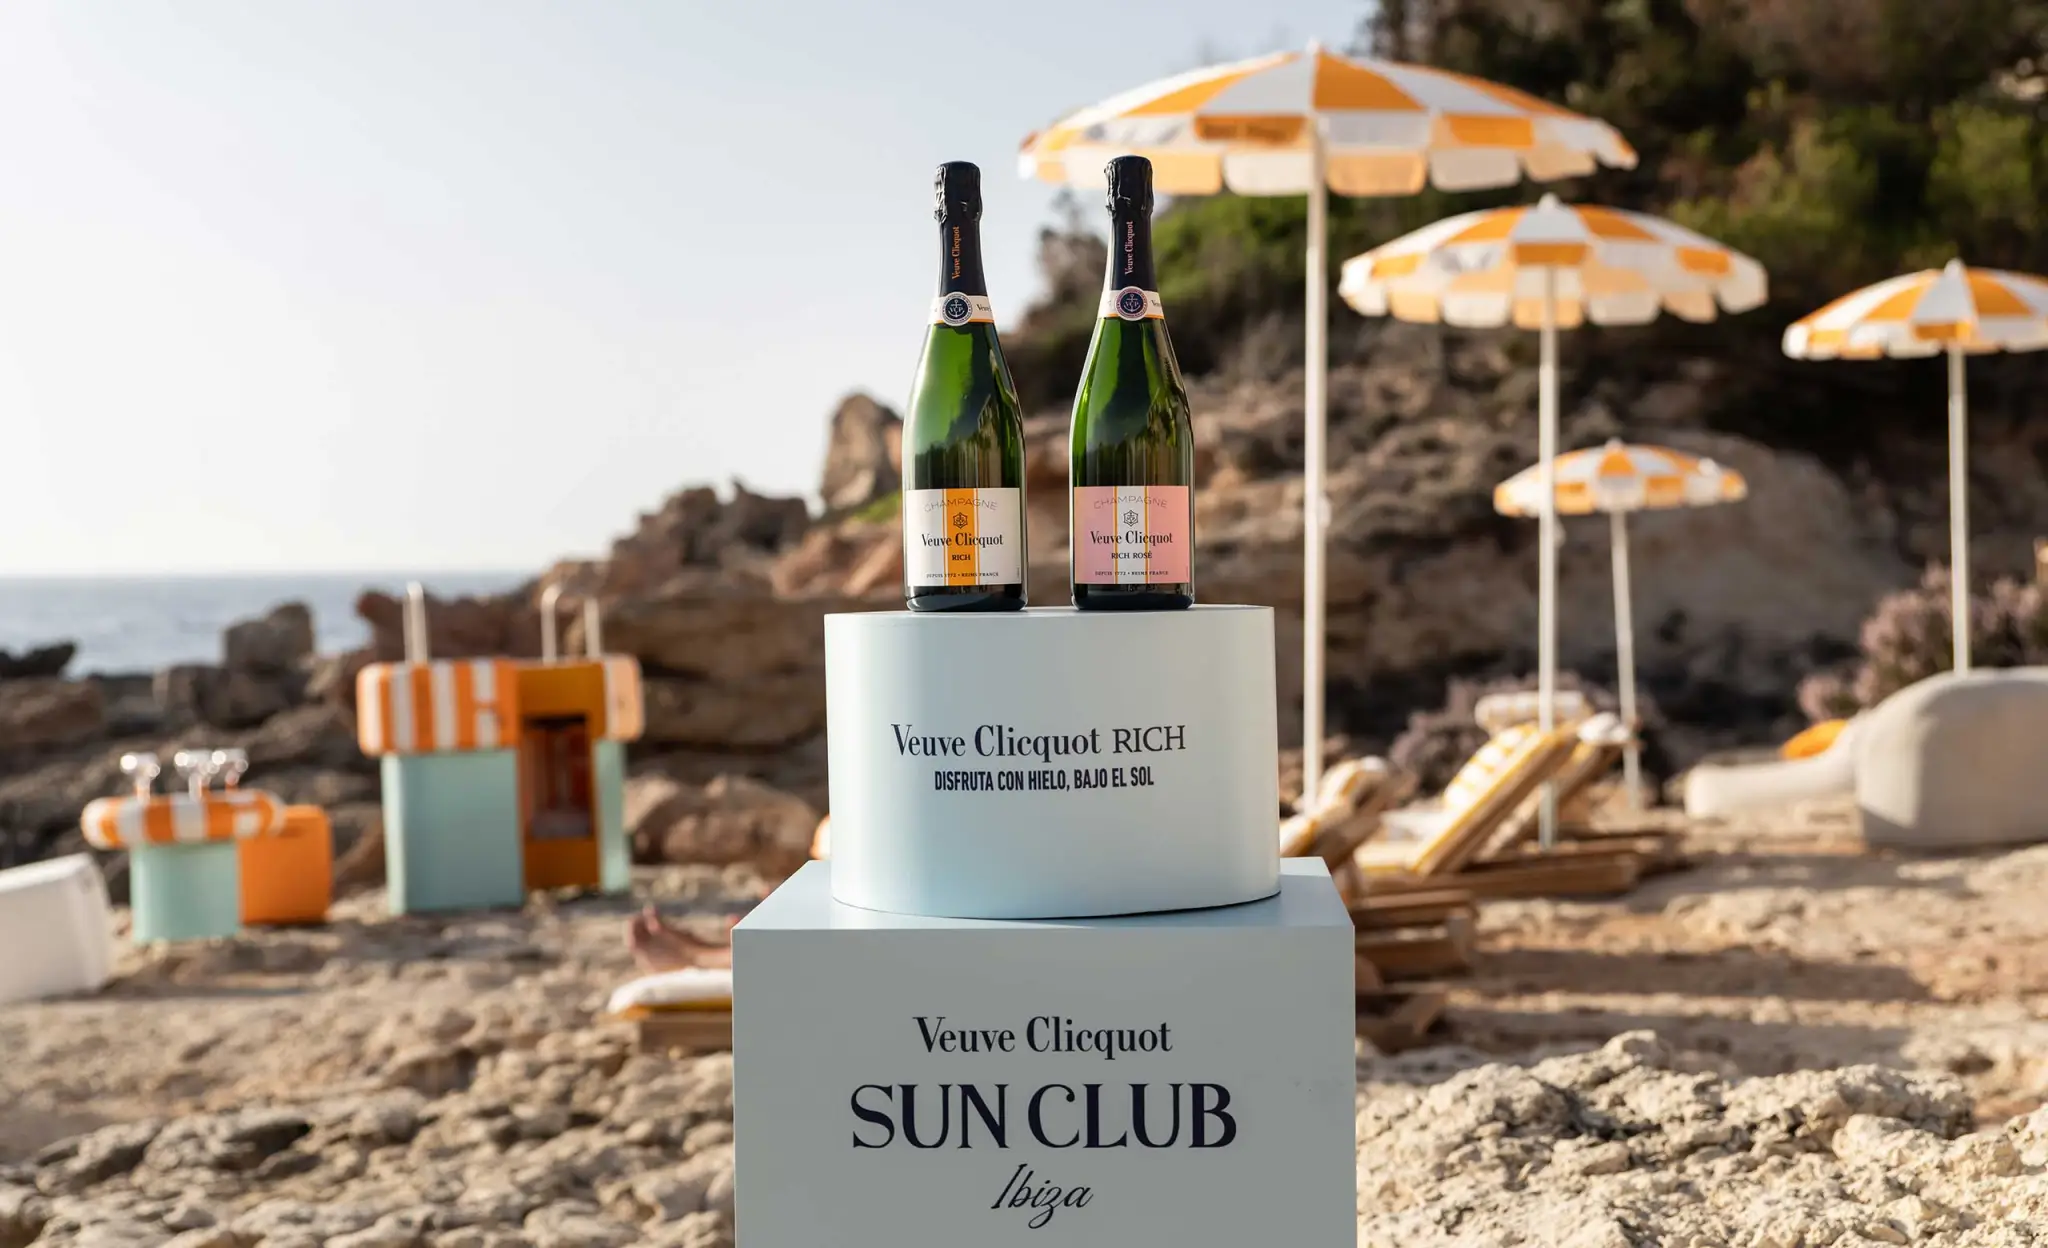 The Veuve Clicquot Sun Club offers the house’s new cuvée